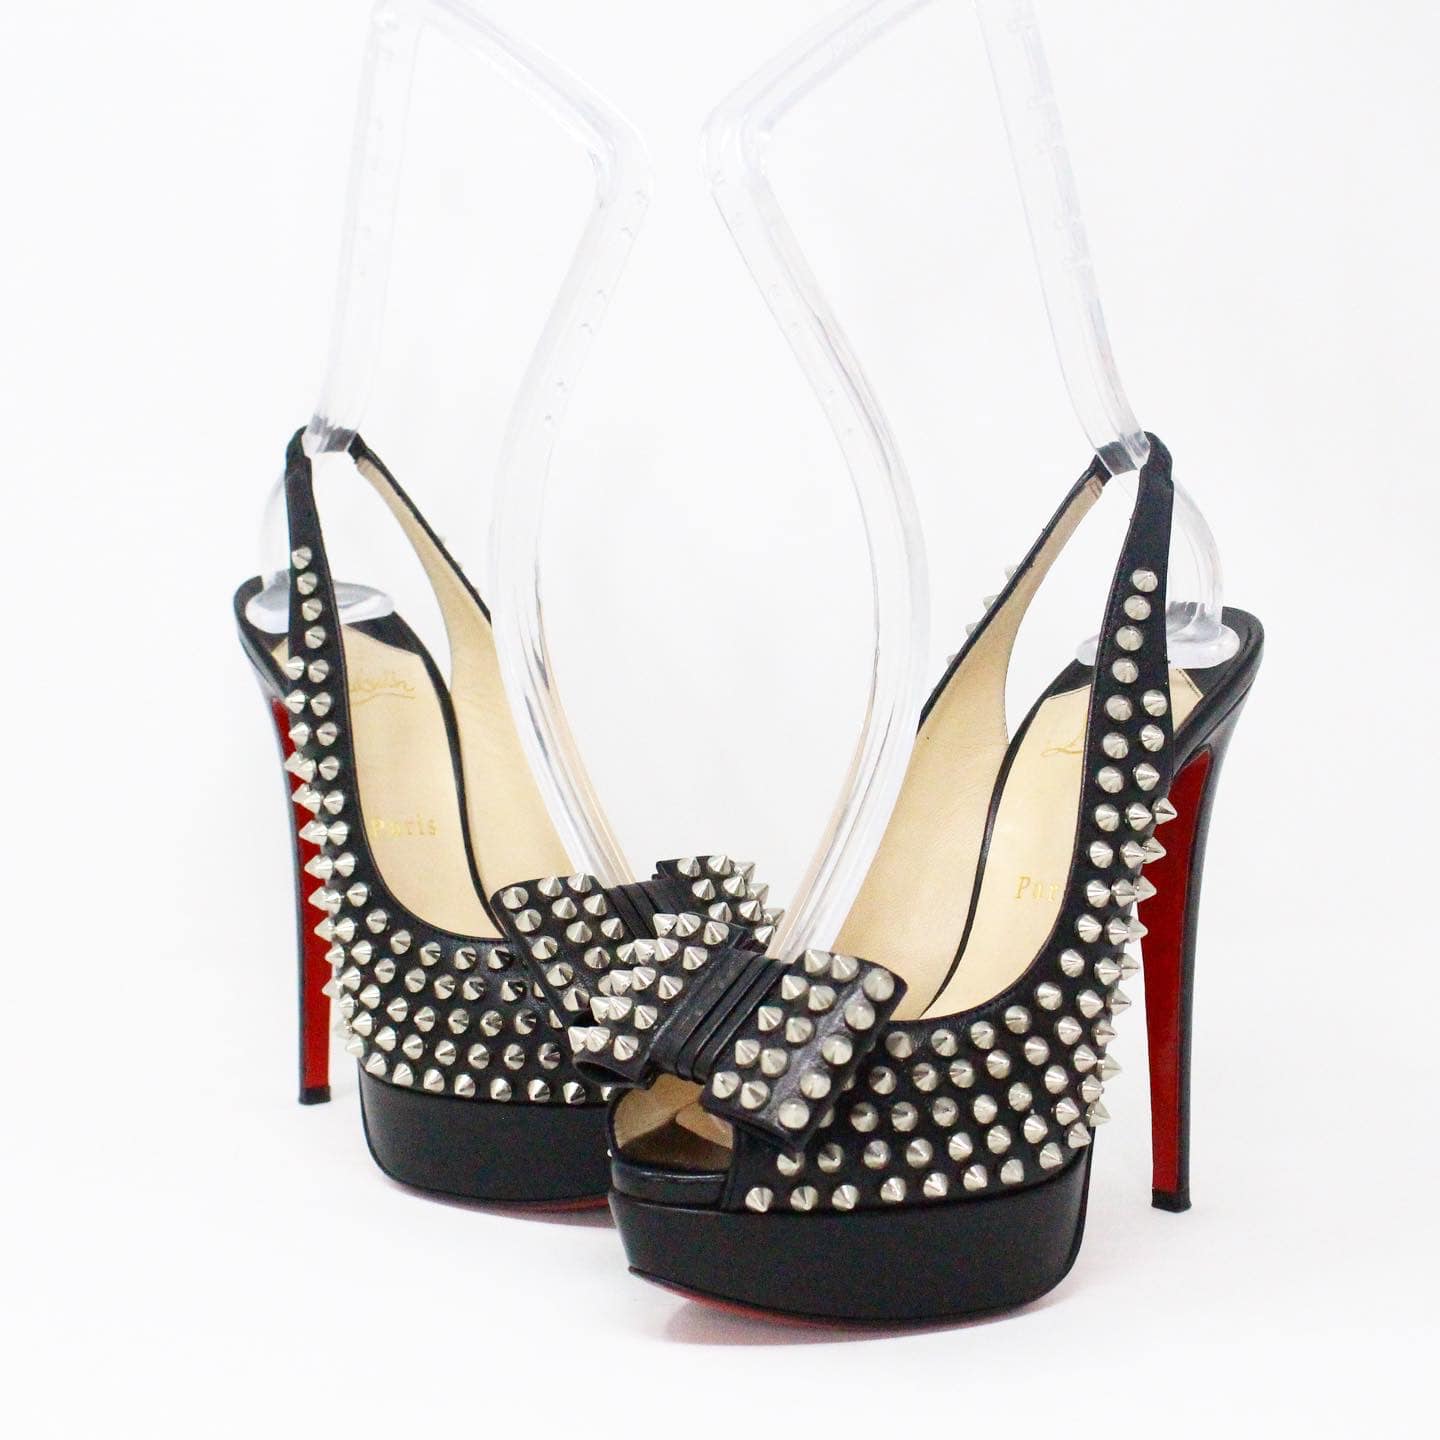 Christian Louboutin Black Studded Accent Heels Pumps Size 5 1/2/35.5